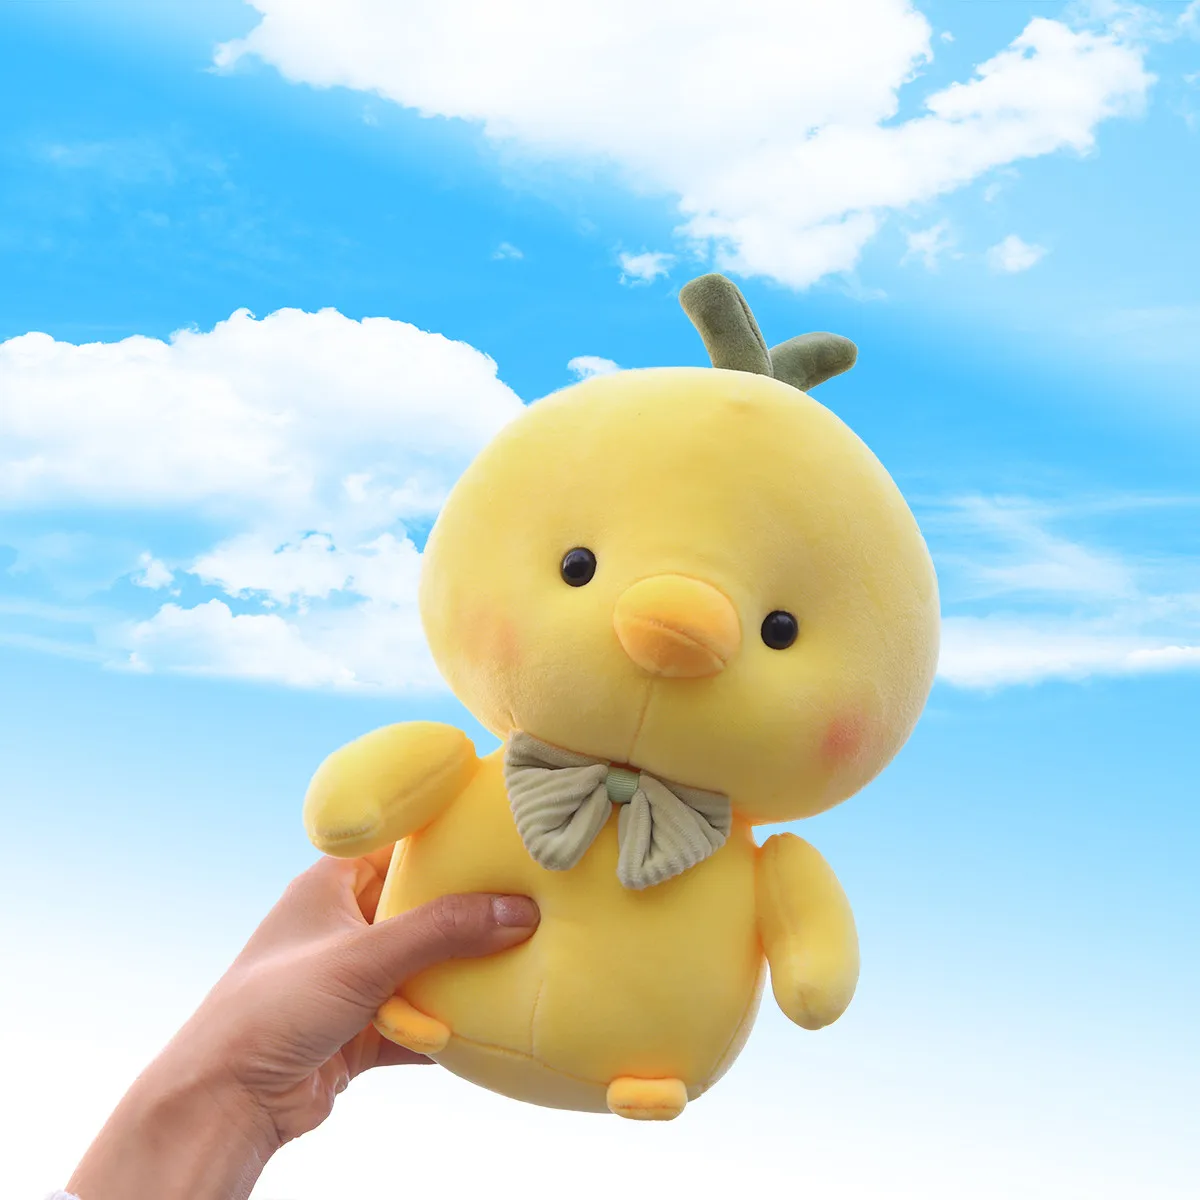 

25-50cm Lovely Chicken Plush Toys Soft Animal Yellow Small Chick Doll for Kids Baby Kawaii Gift Stuffed Cartoon Nap Pillow